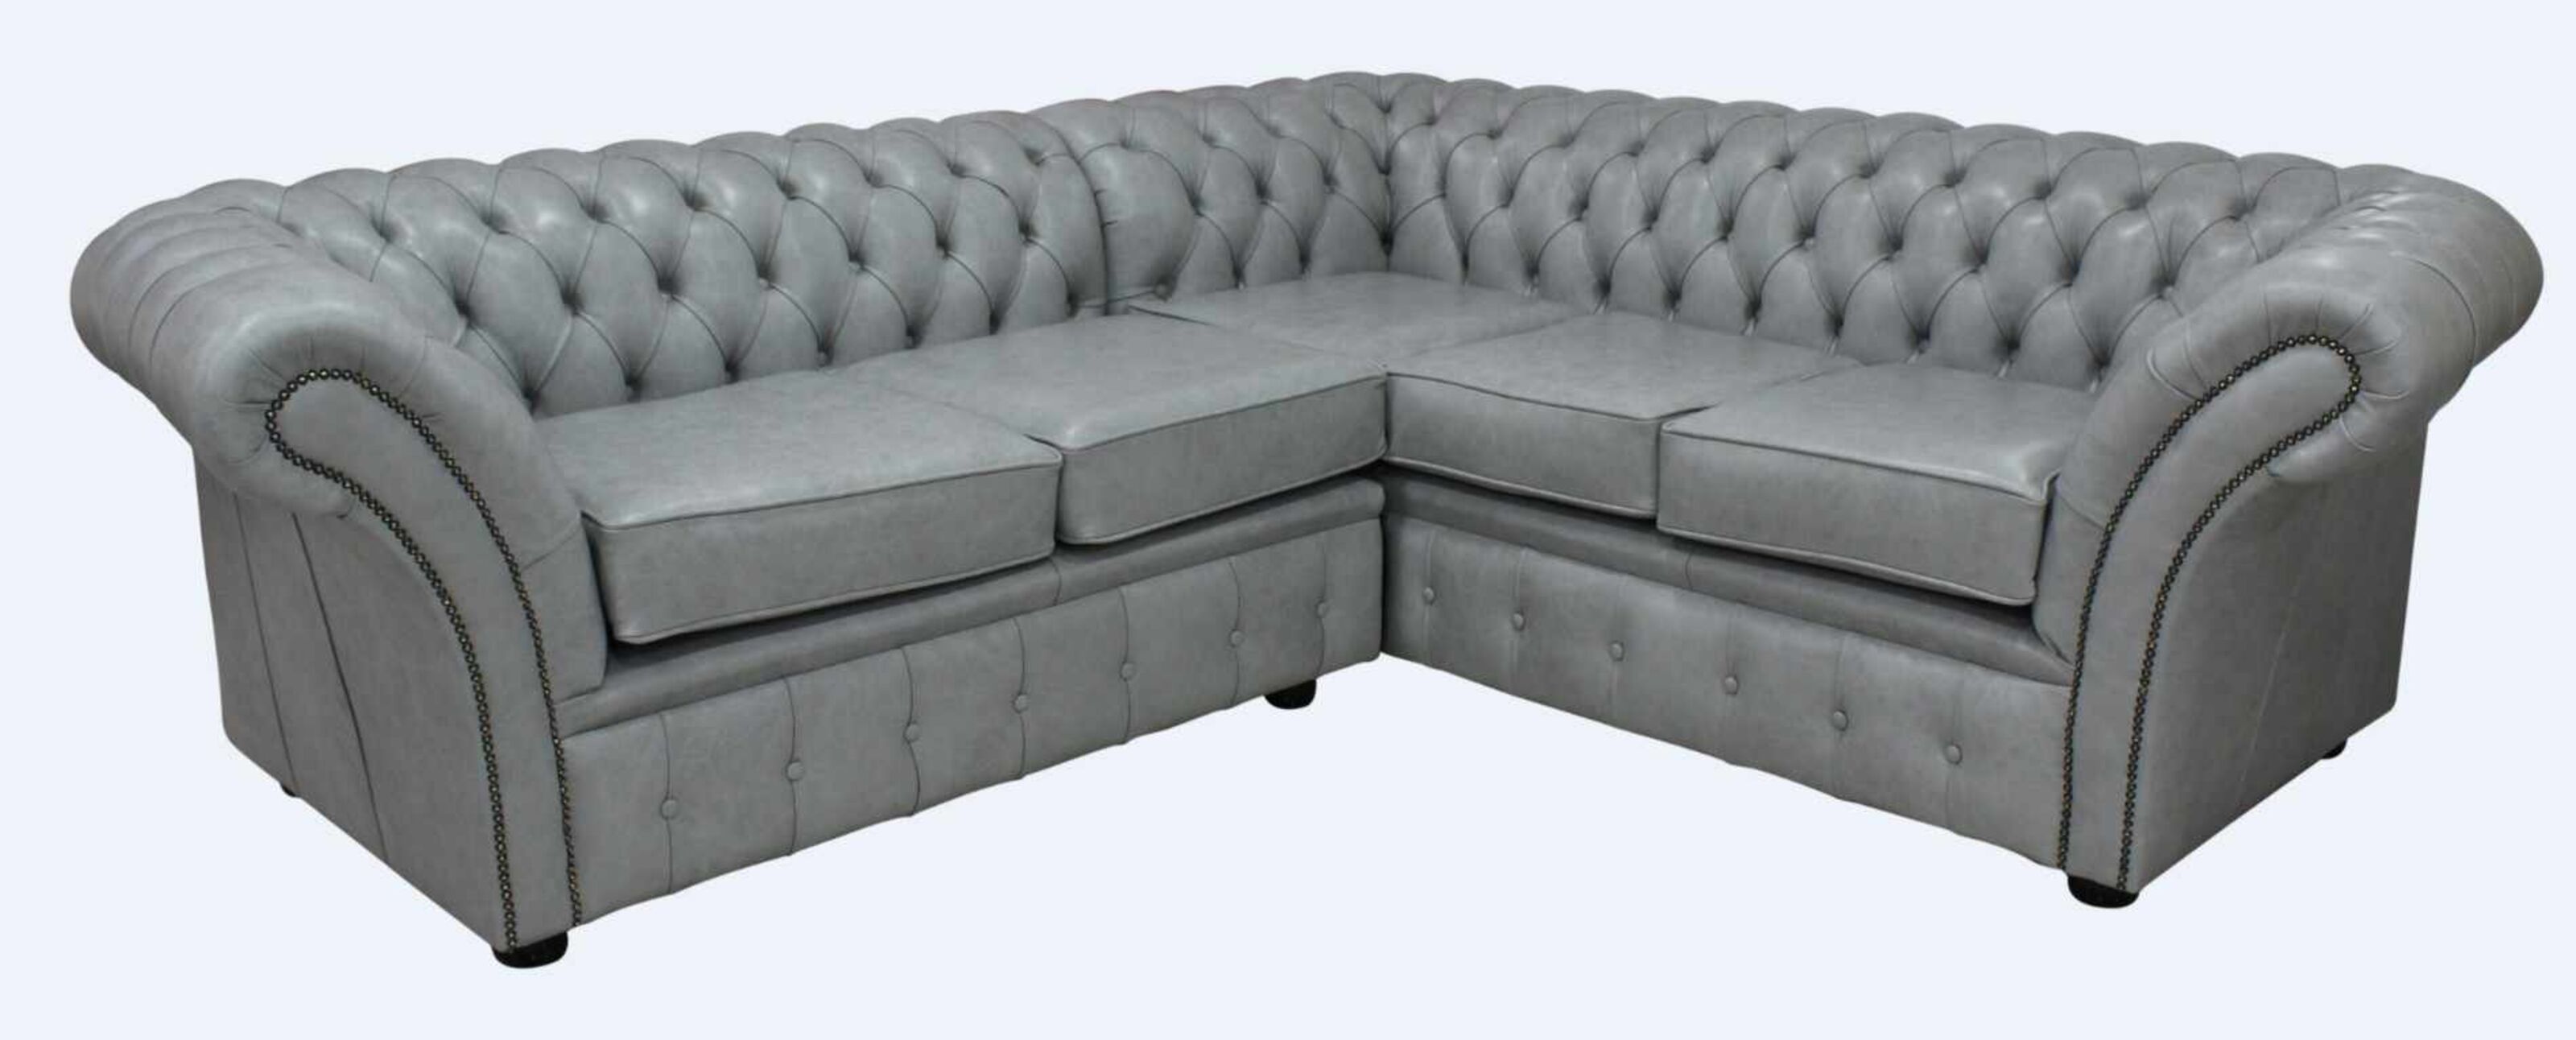 Last Chance Luxury Chesterfield Sofa Clearance Deals  %Post Title